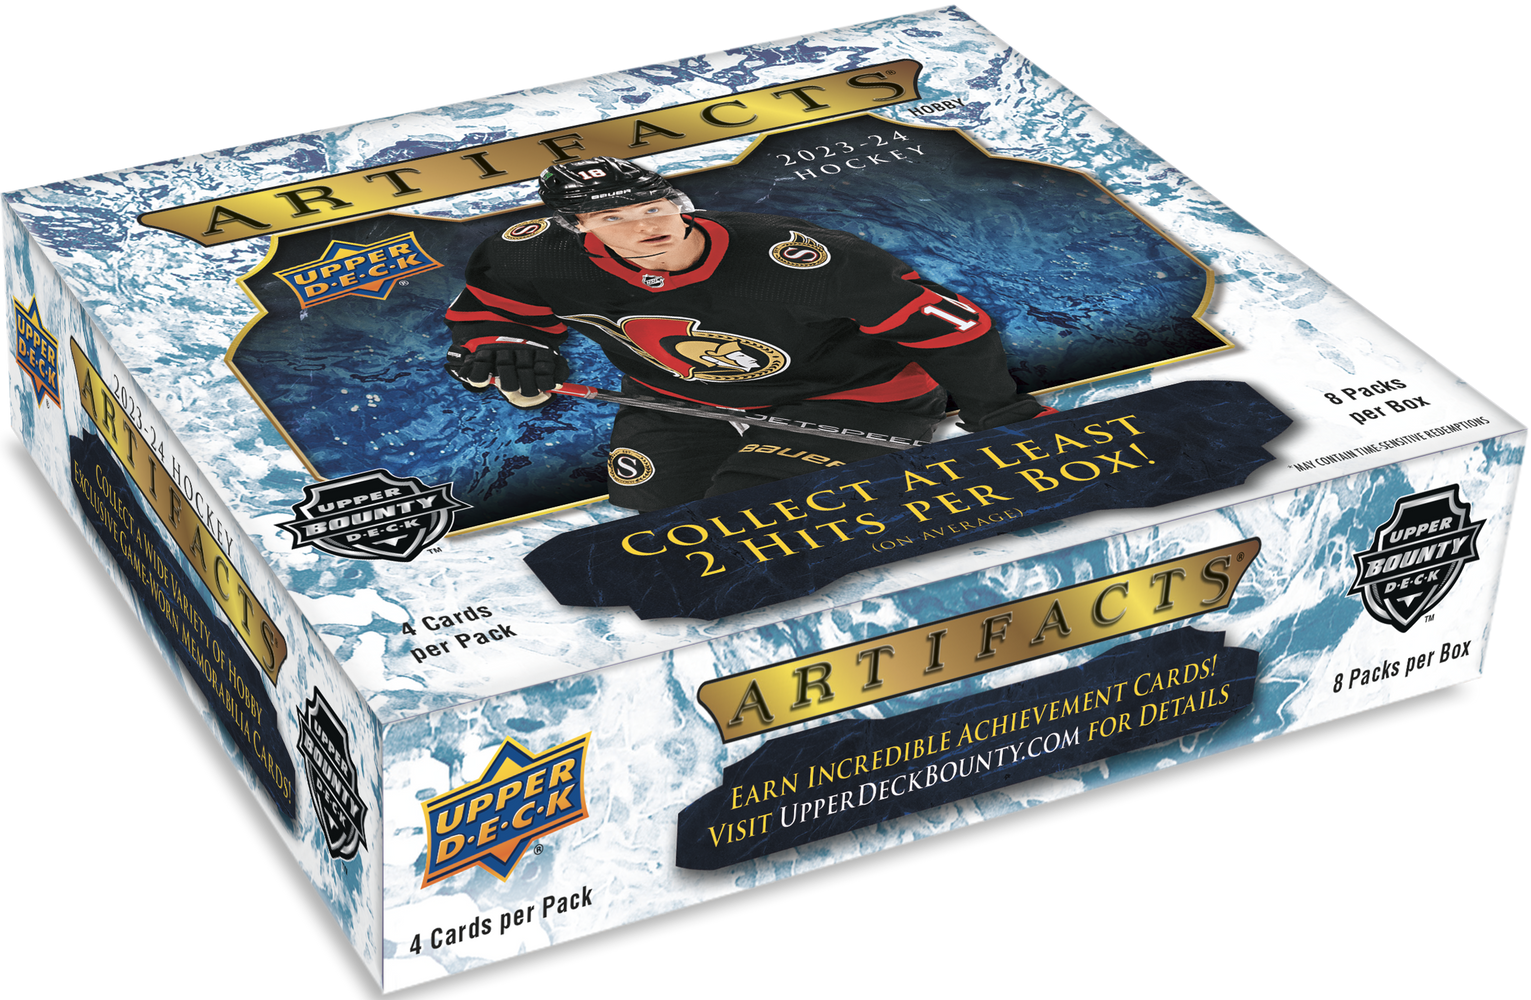 2023/24 Upper Deck Artifacts NHL Hockey Hobby Box / Case PRE ORDER - Pastime Sports & Games